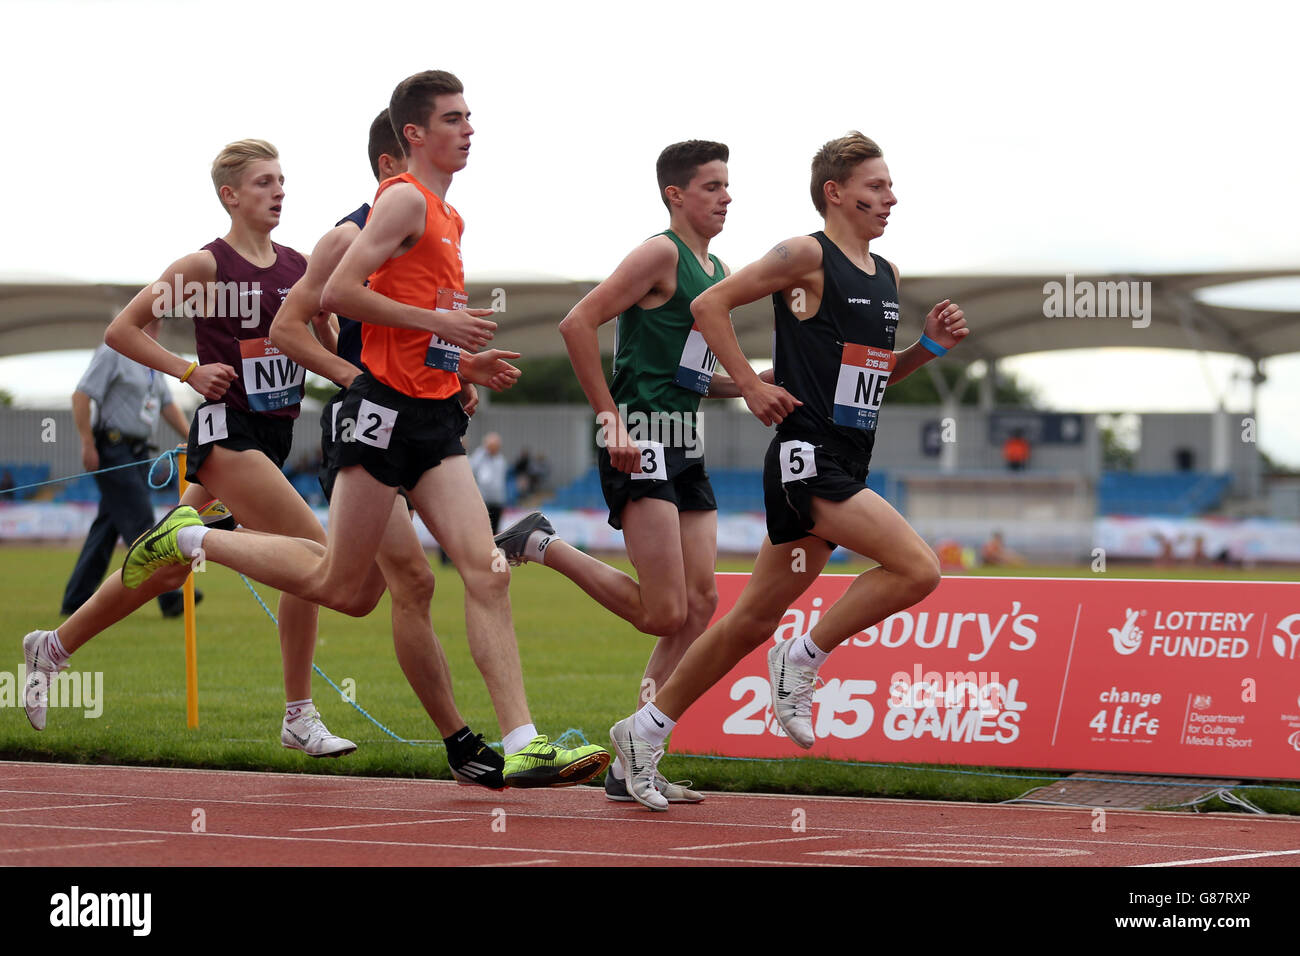 Athletes participate in the boys 3000 metre event at the Sainsbury's 2015 School Games at the Manchester Regional Arena. Stock Photo